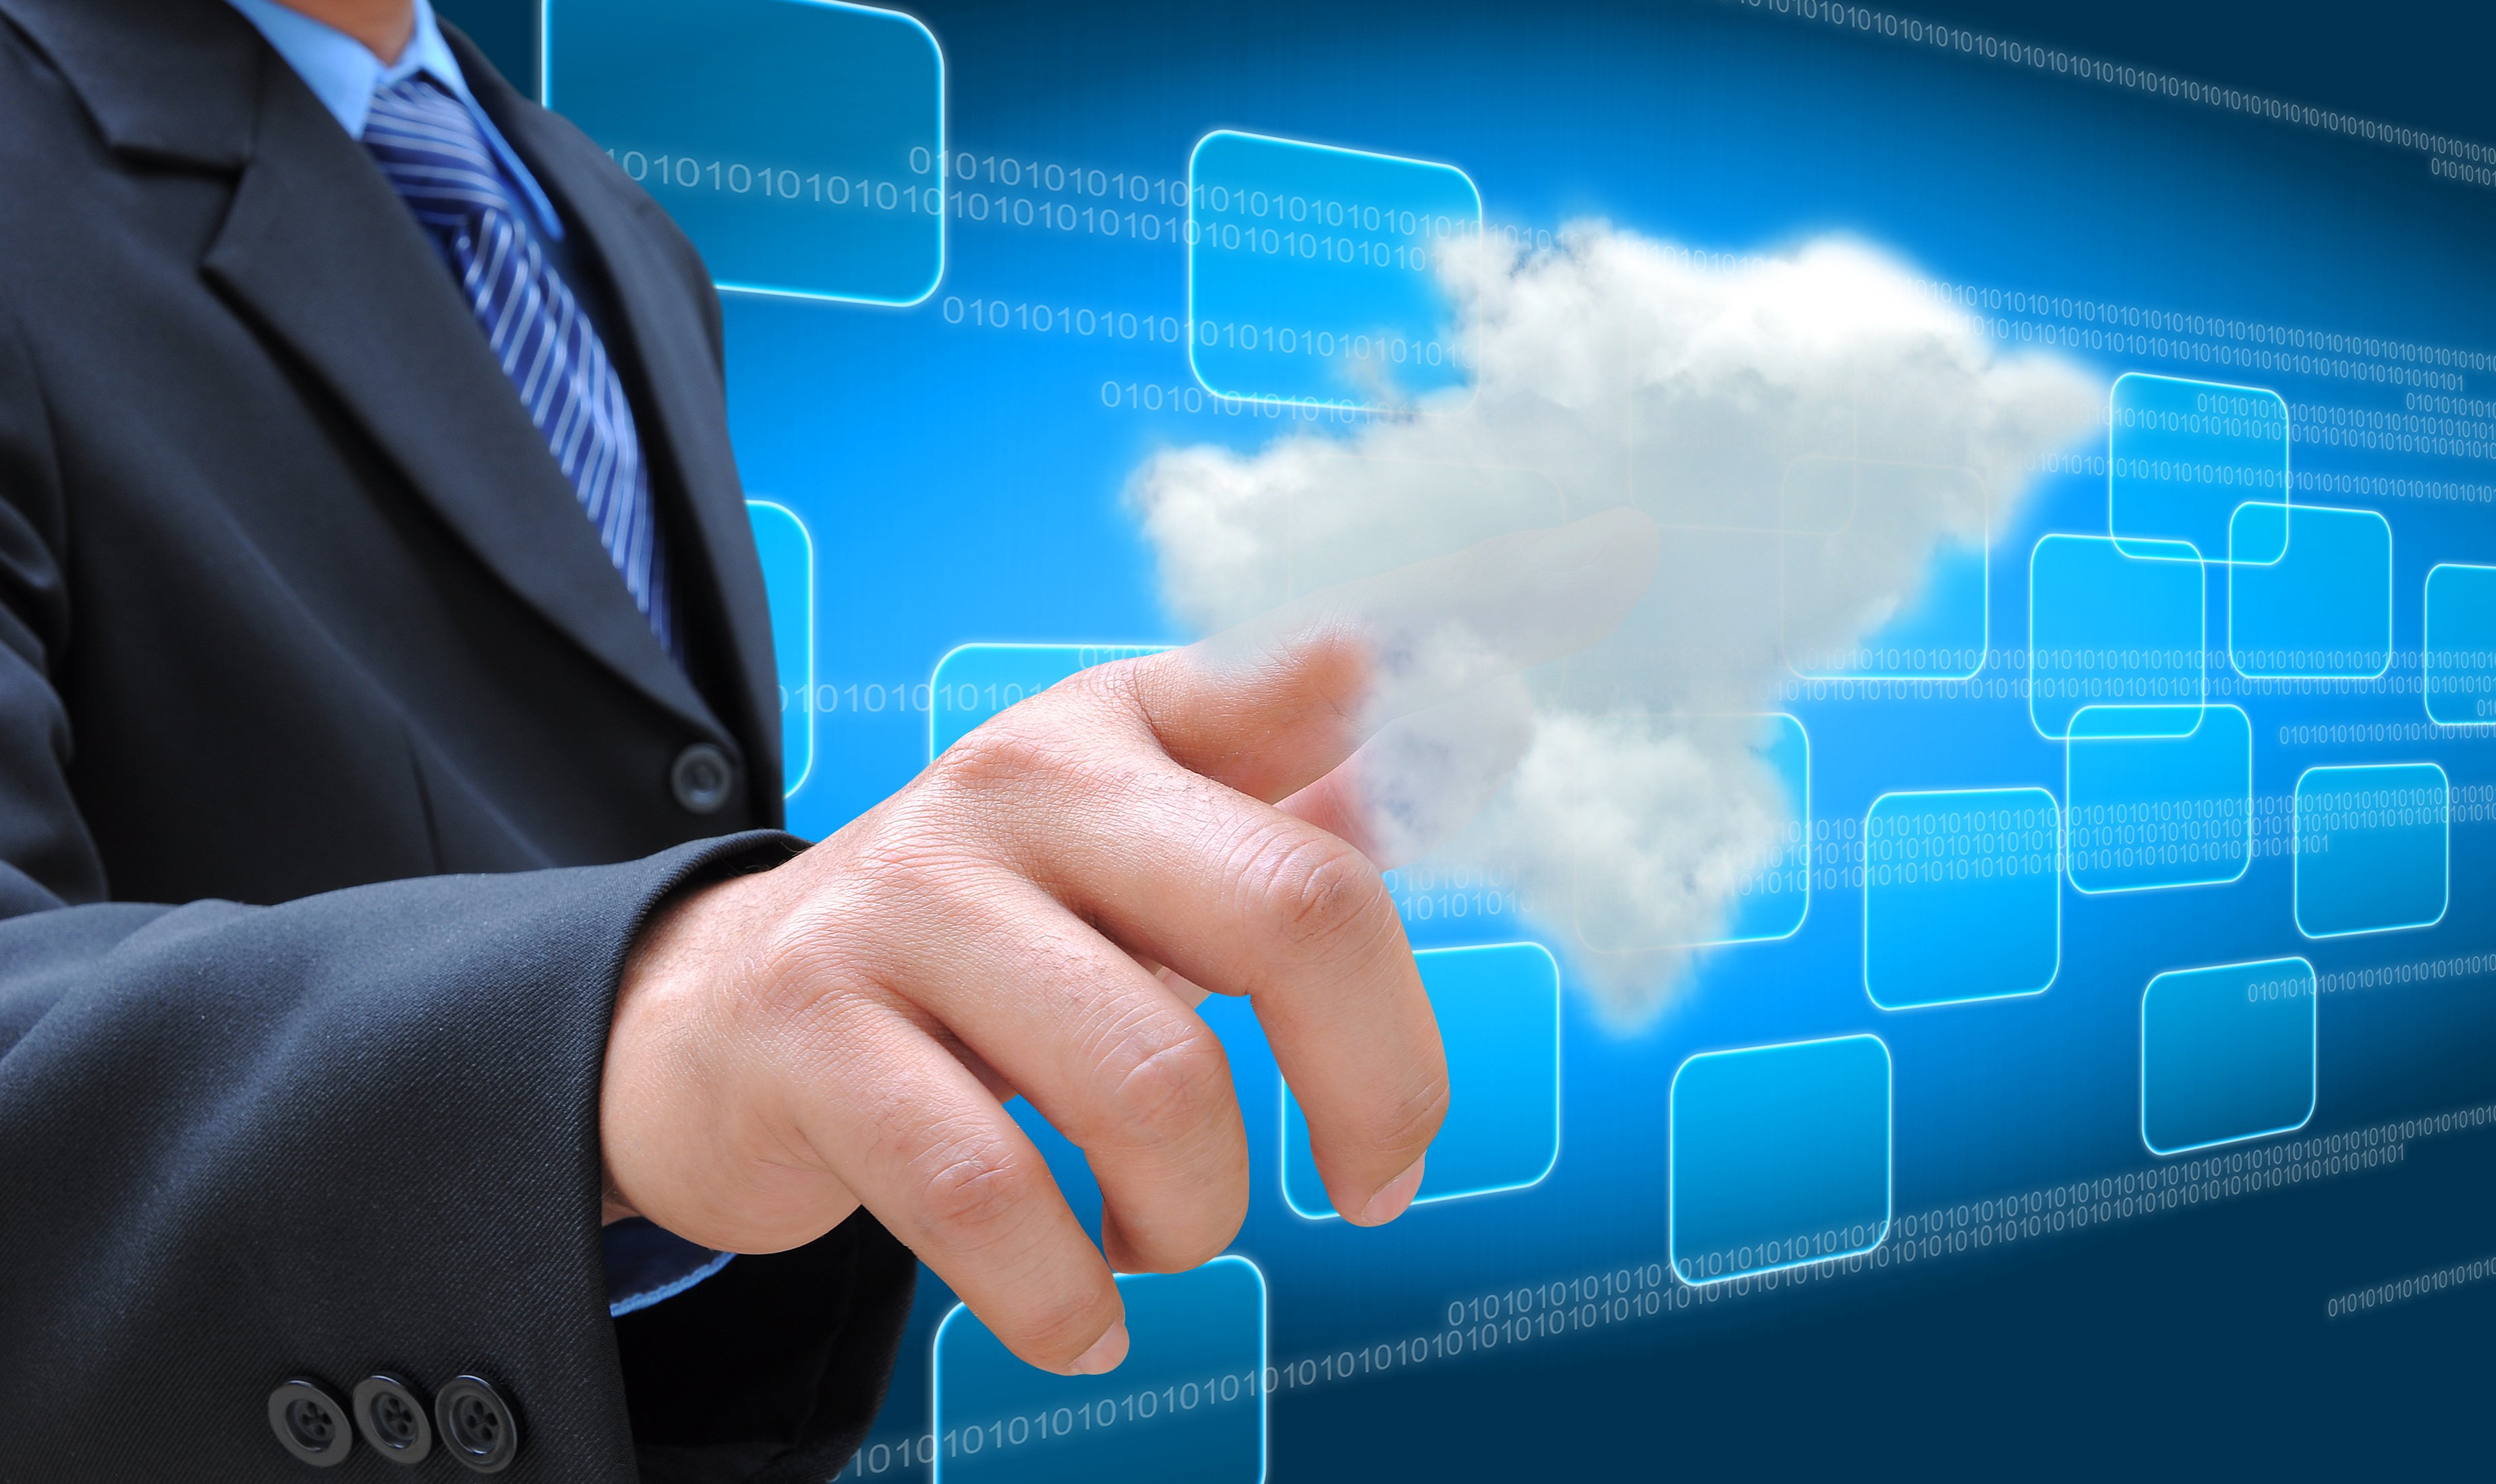 4 Differences Between Cloud and On-Premises that Every Organization Needs to Understand